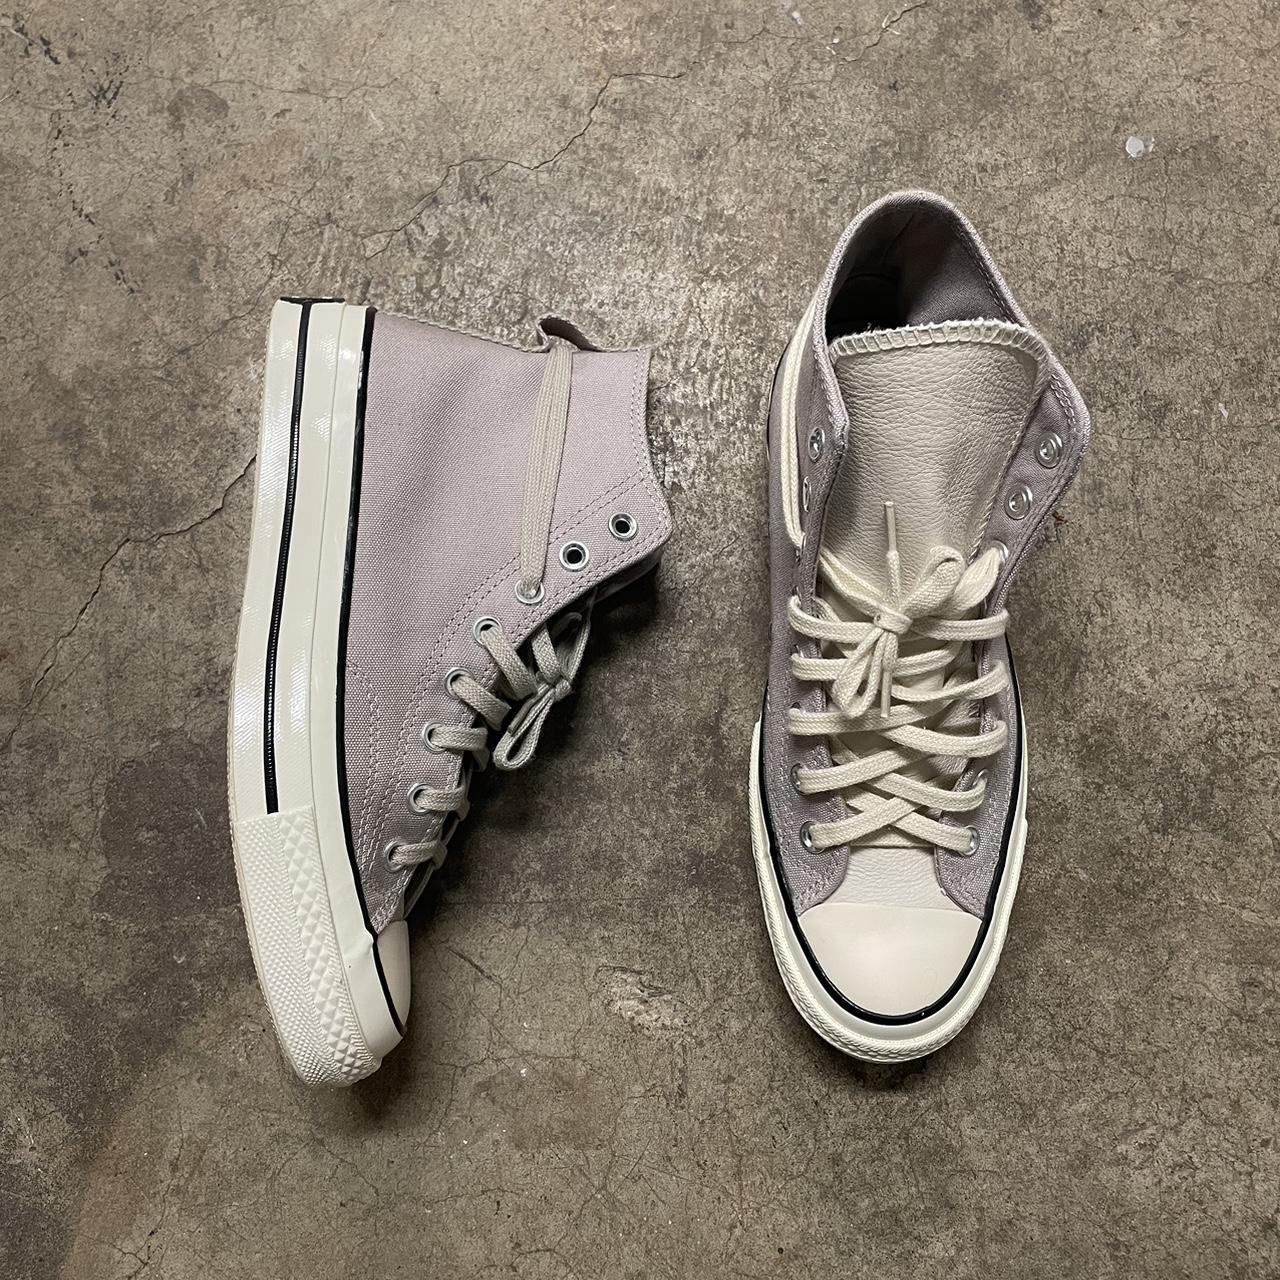 Fear of God Men's White and Grey Trainers